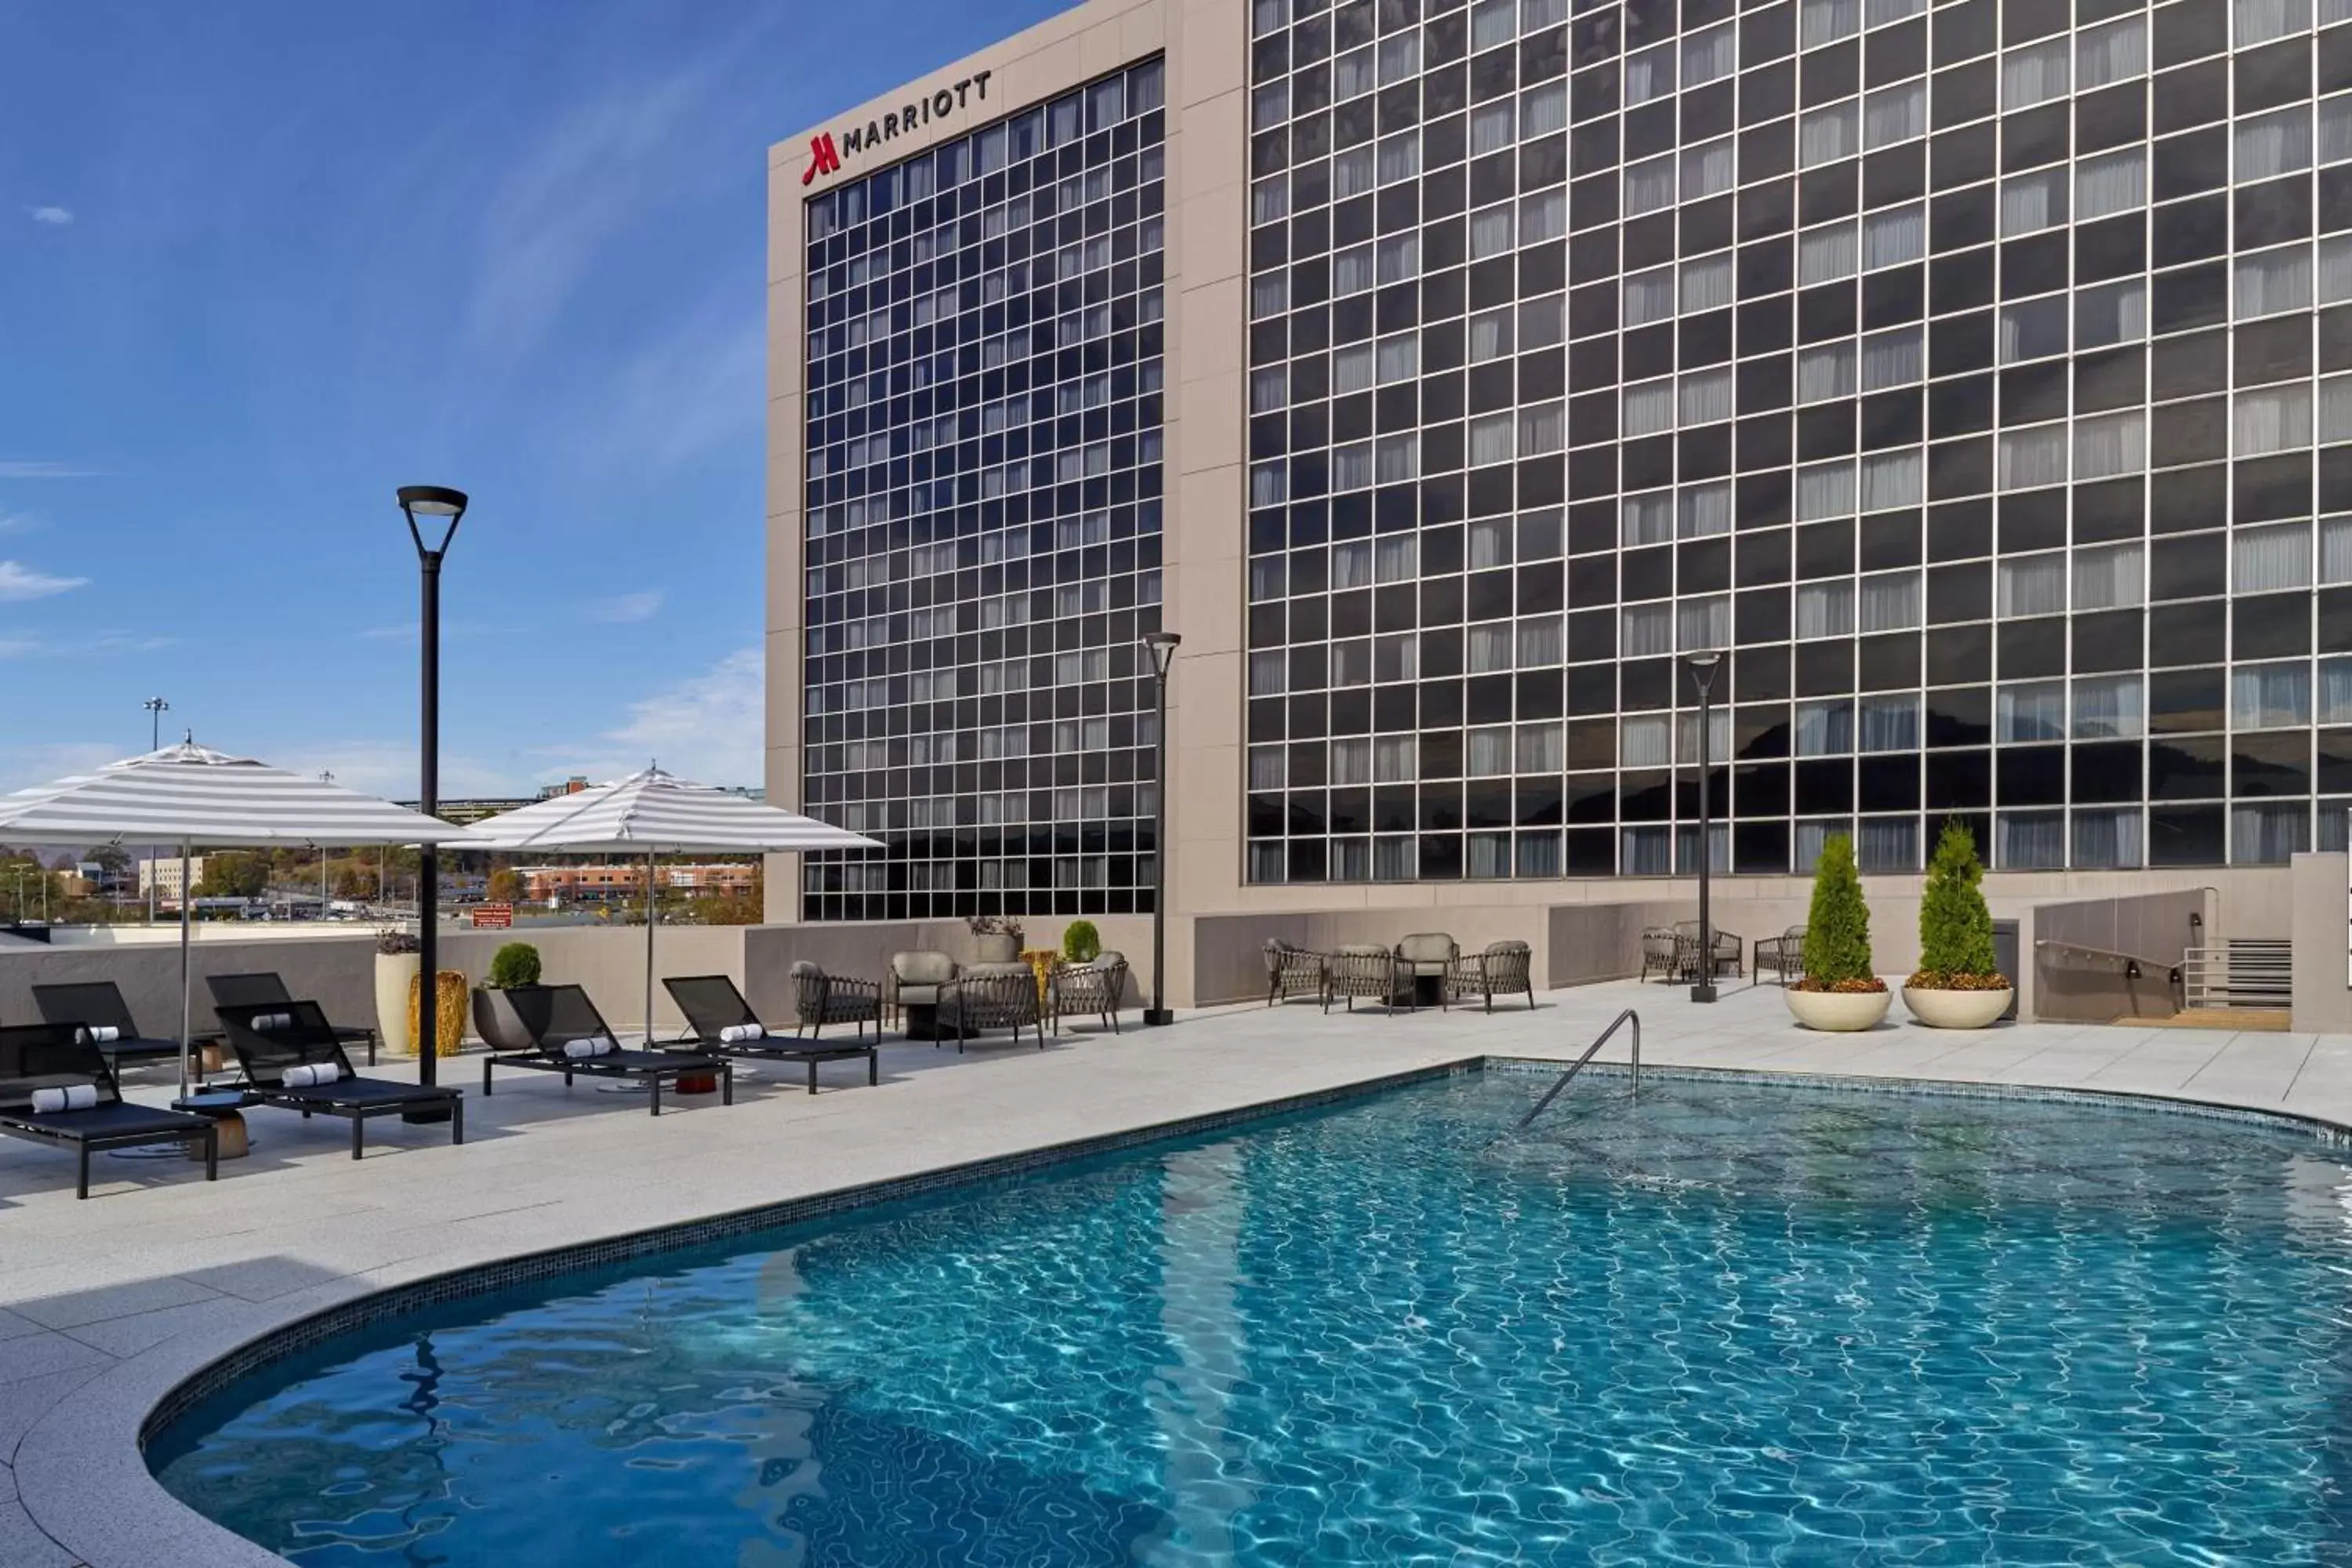 Swimming Pool in Chattanooga Marriott Downtown